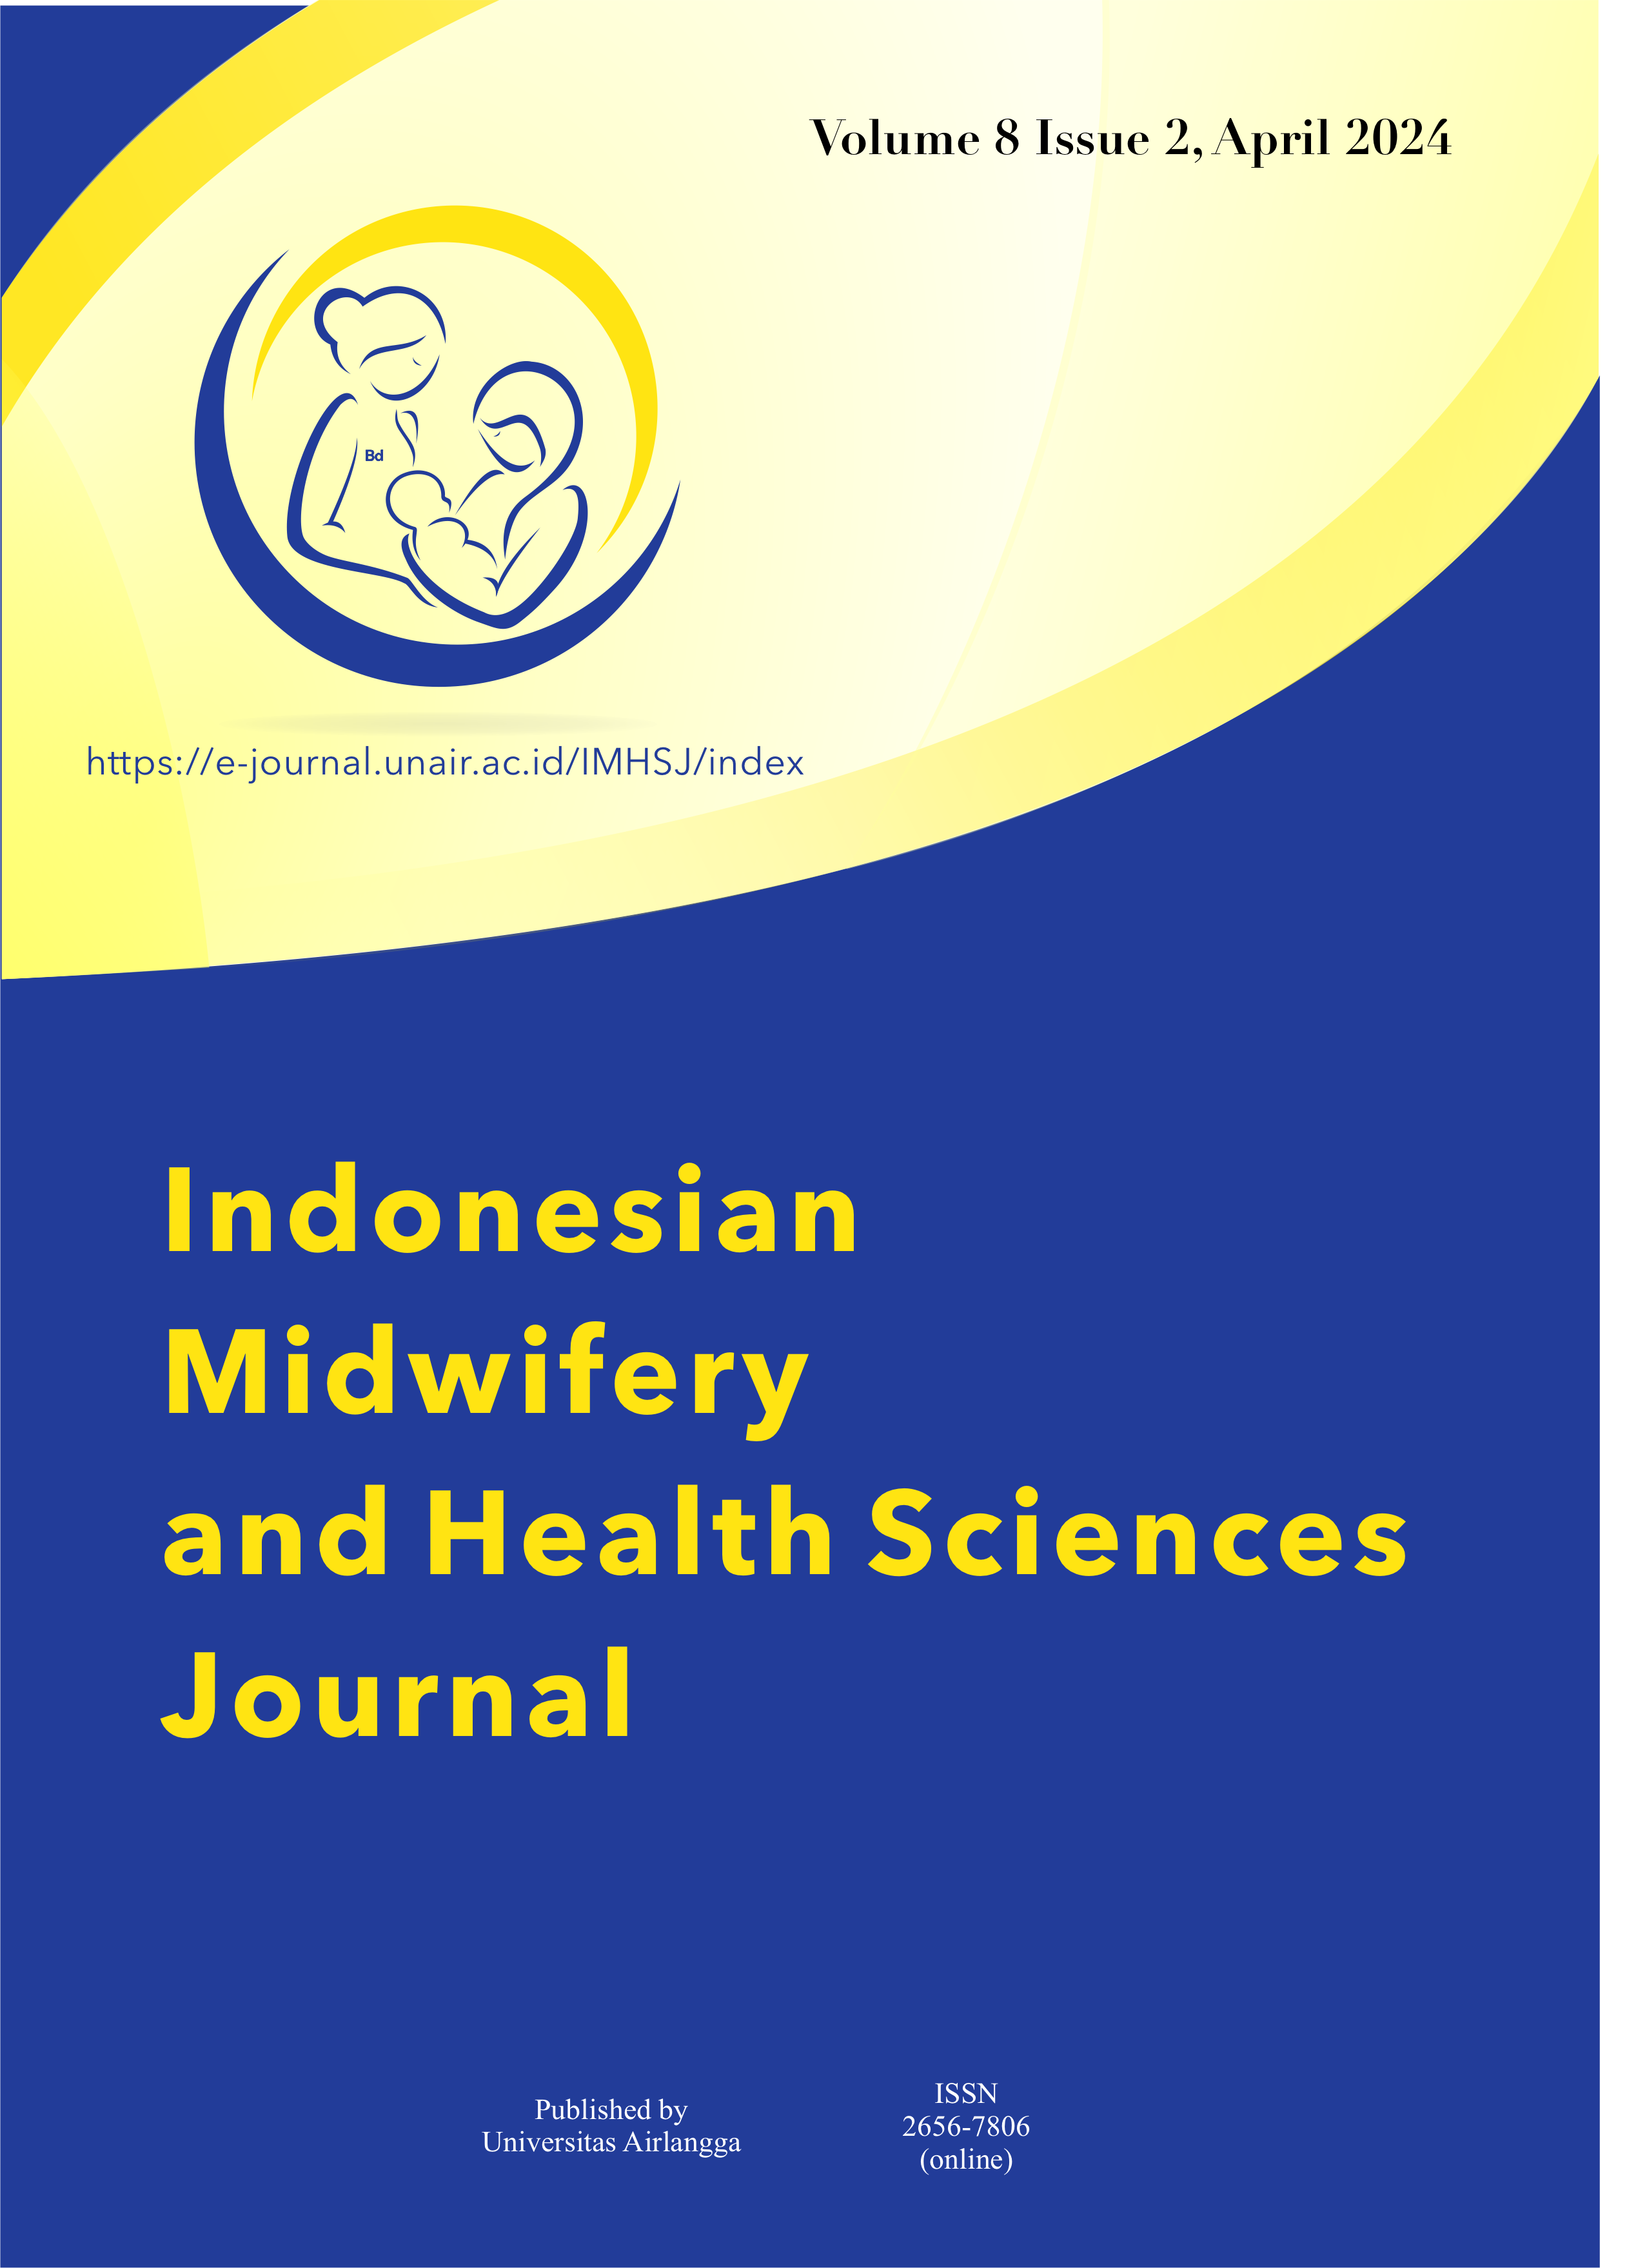 						View Vol. 8 No. 2 (2024): Indonesian Midwifery and Health Sciences Journal, April 2024
					